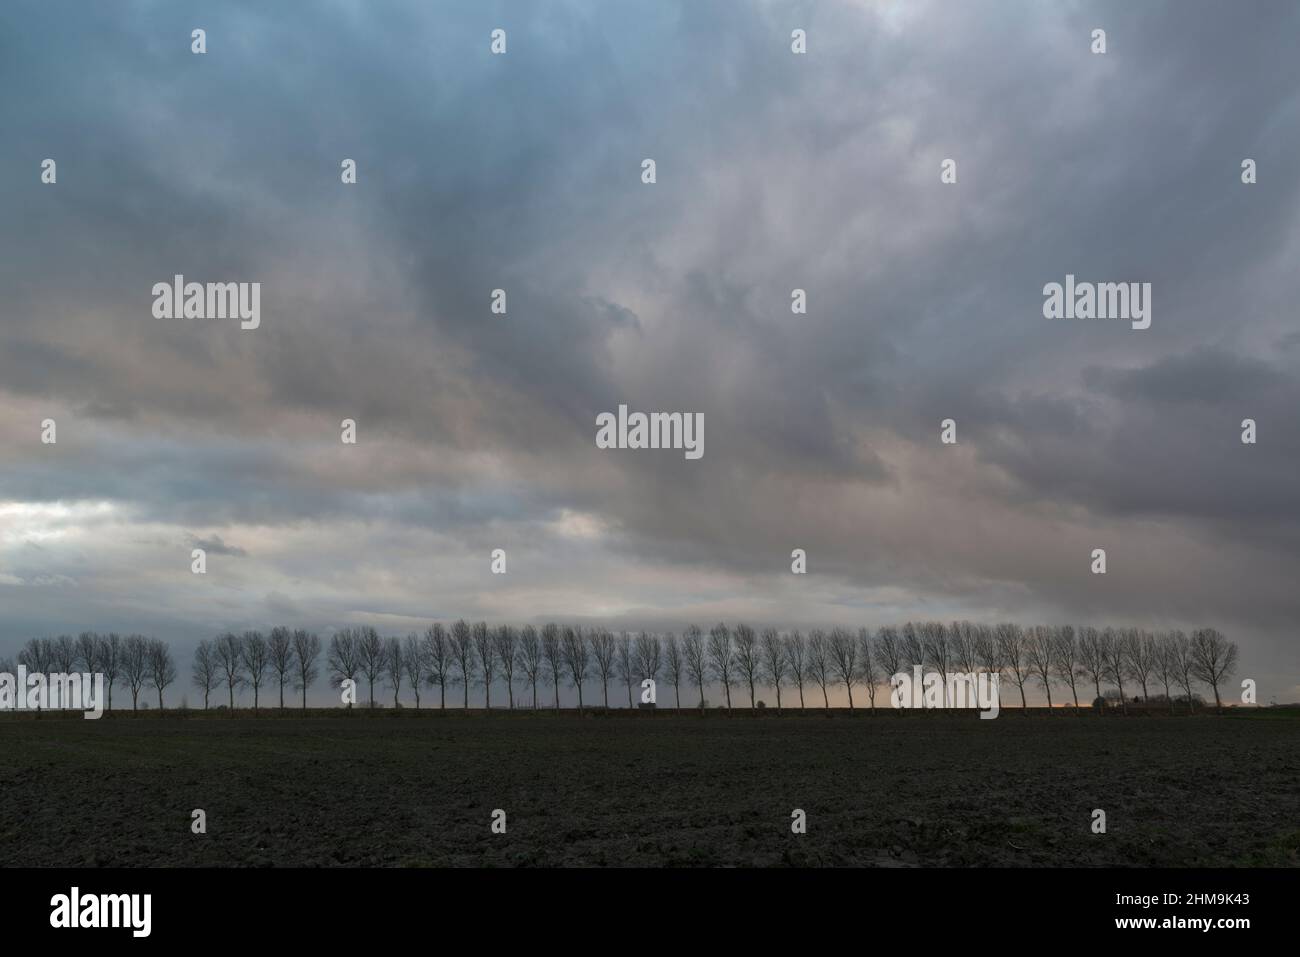 Threatening rain clouds above a row of trees at dusk in the countryside of Zeeland province, Netherlands Stock Photo